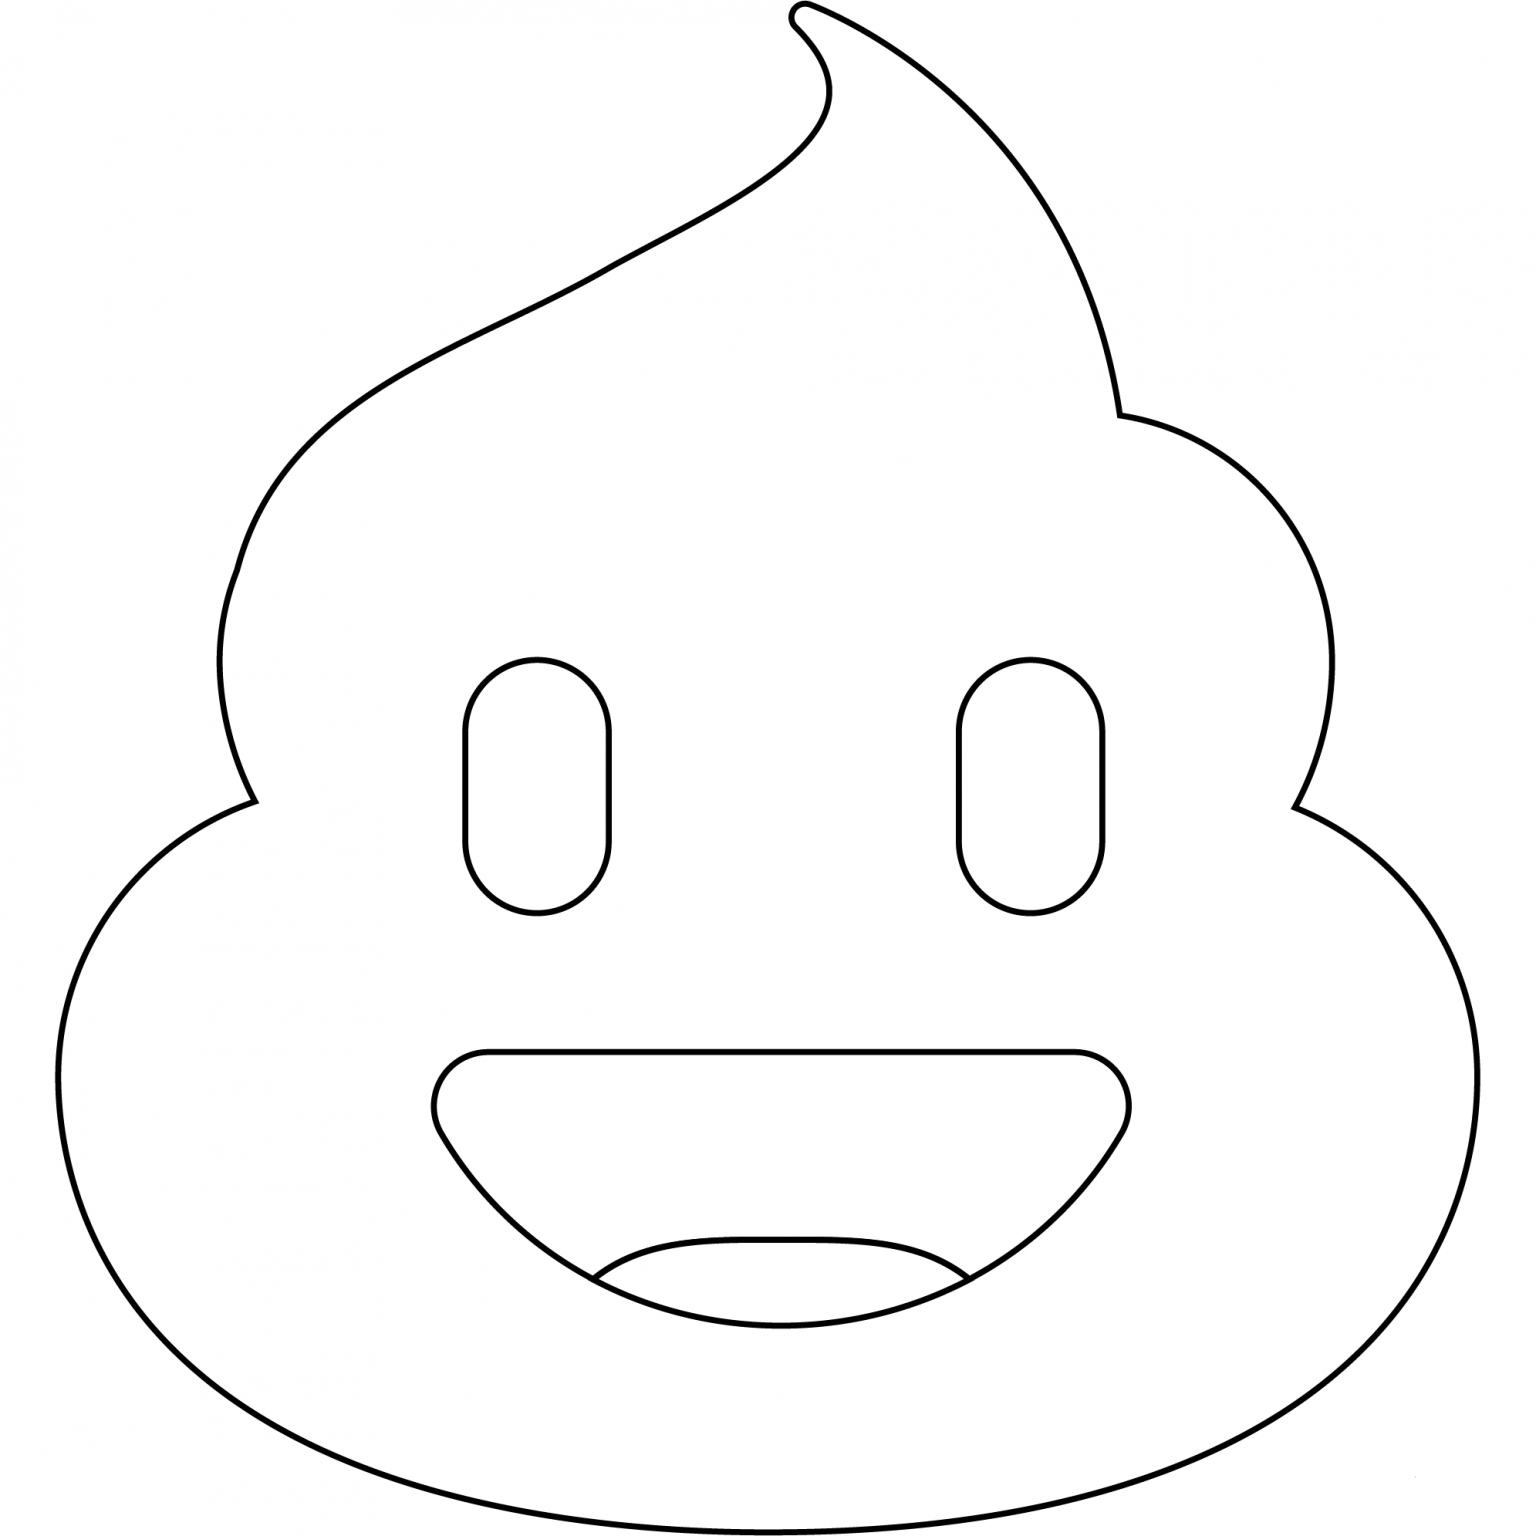 Poo Face Emoji coloring page - ColouringPages